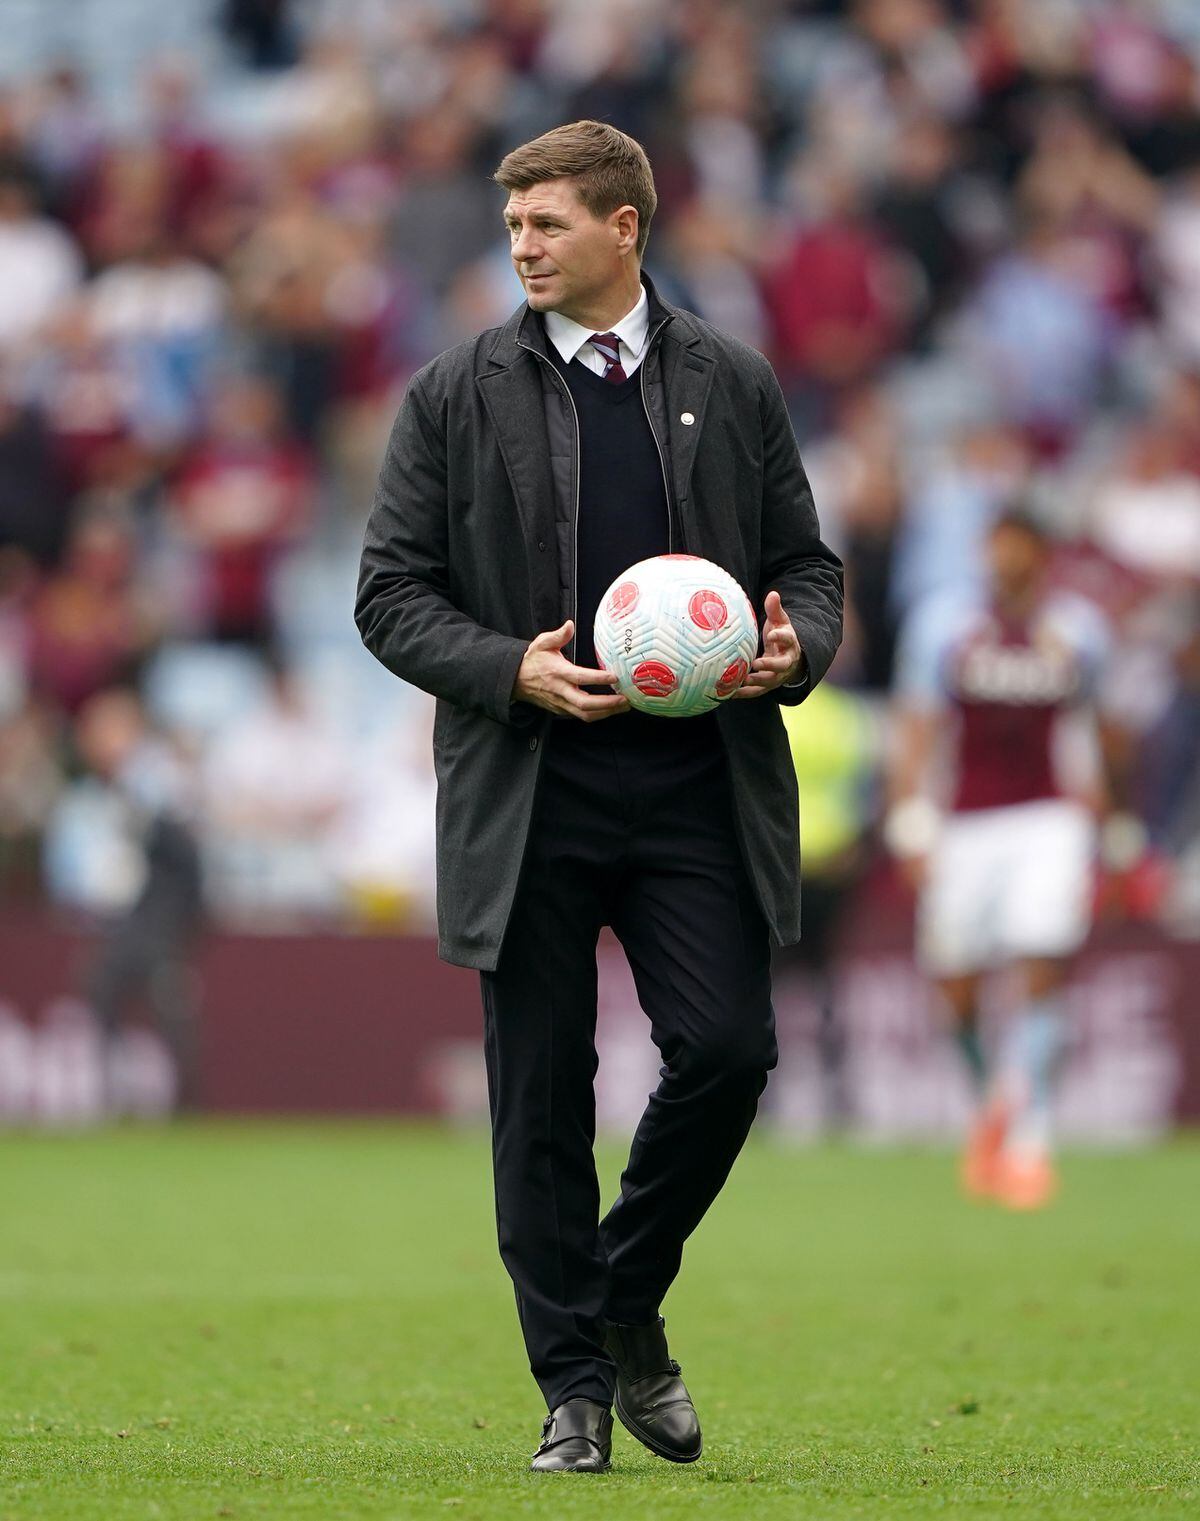 
              
Aston Villa manager Steven Gerrard after the final whistle following the Premier League match at Villa Park, Birmingham. Picture date: Sunday May 15, 2022. PA Photo. See PA story SOCCER Villa. Photo credit should read: Zac Goodwin/PA Wire.


RESTRICTIONS: EDITORIAL USE ONLY No use with 
unauthorised audio, video, data, fixture lists, club/league logos or "live" services. Online in-match use limited to 120 images, no video emulation. No use in betting, games or single club/league/player publications.
            
